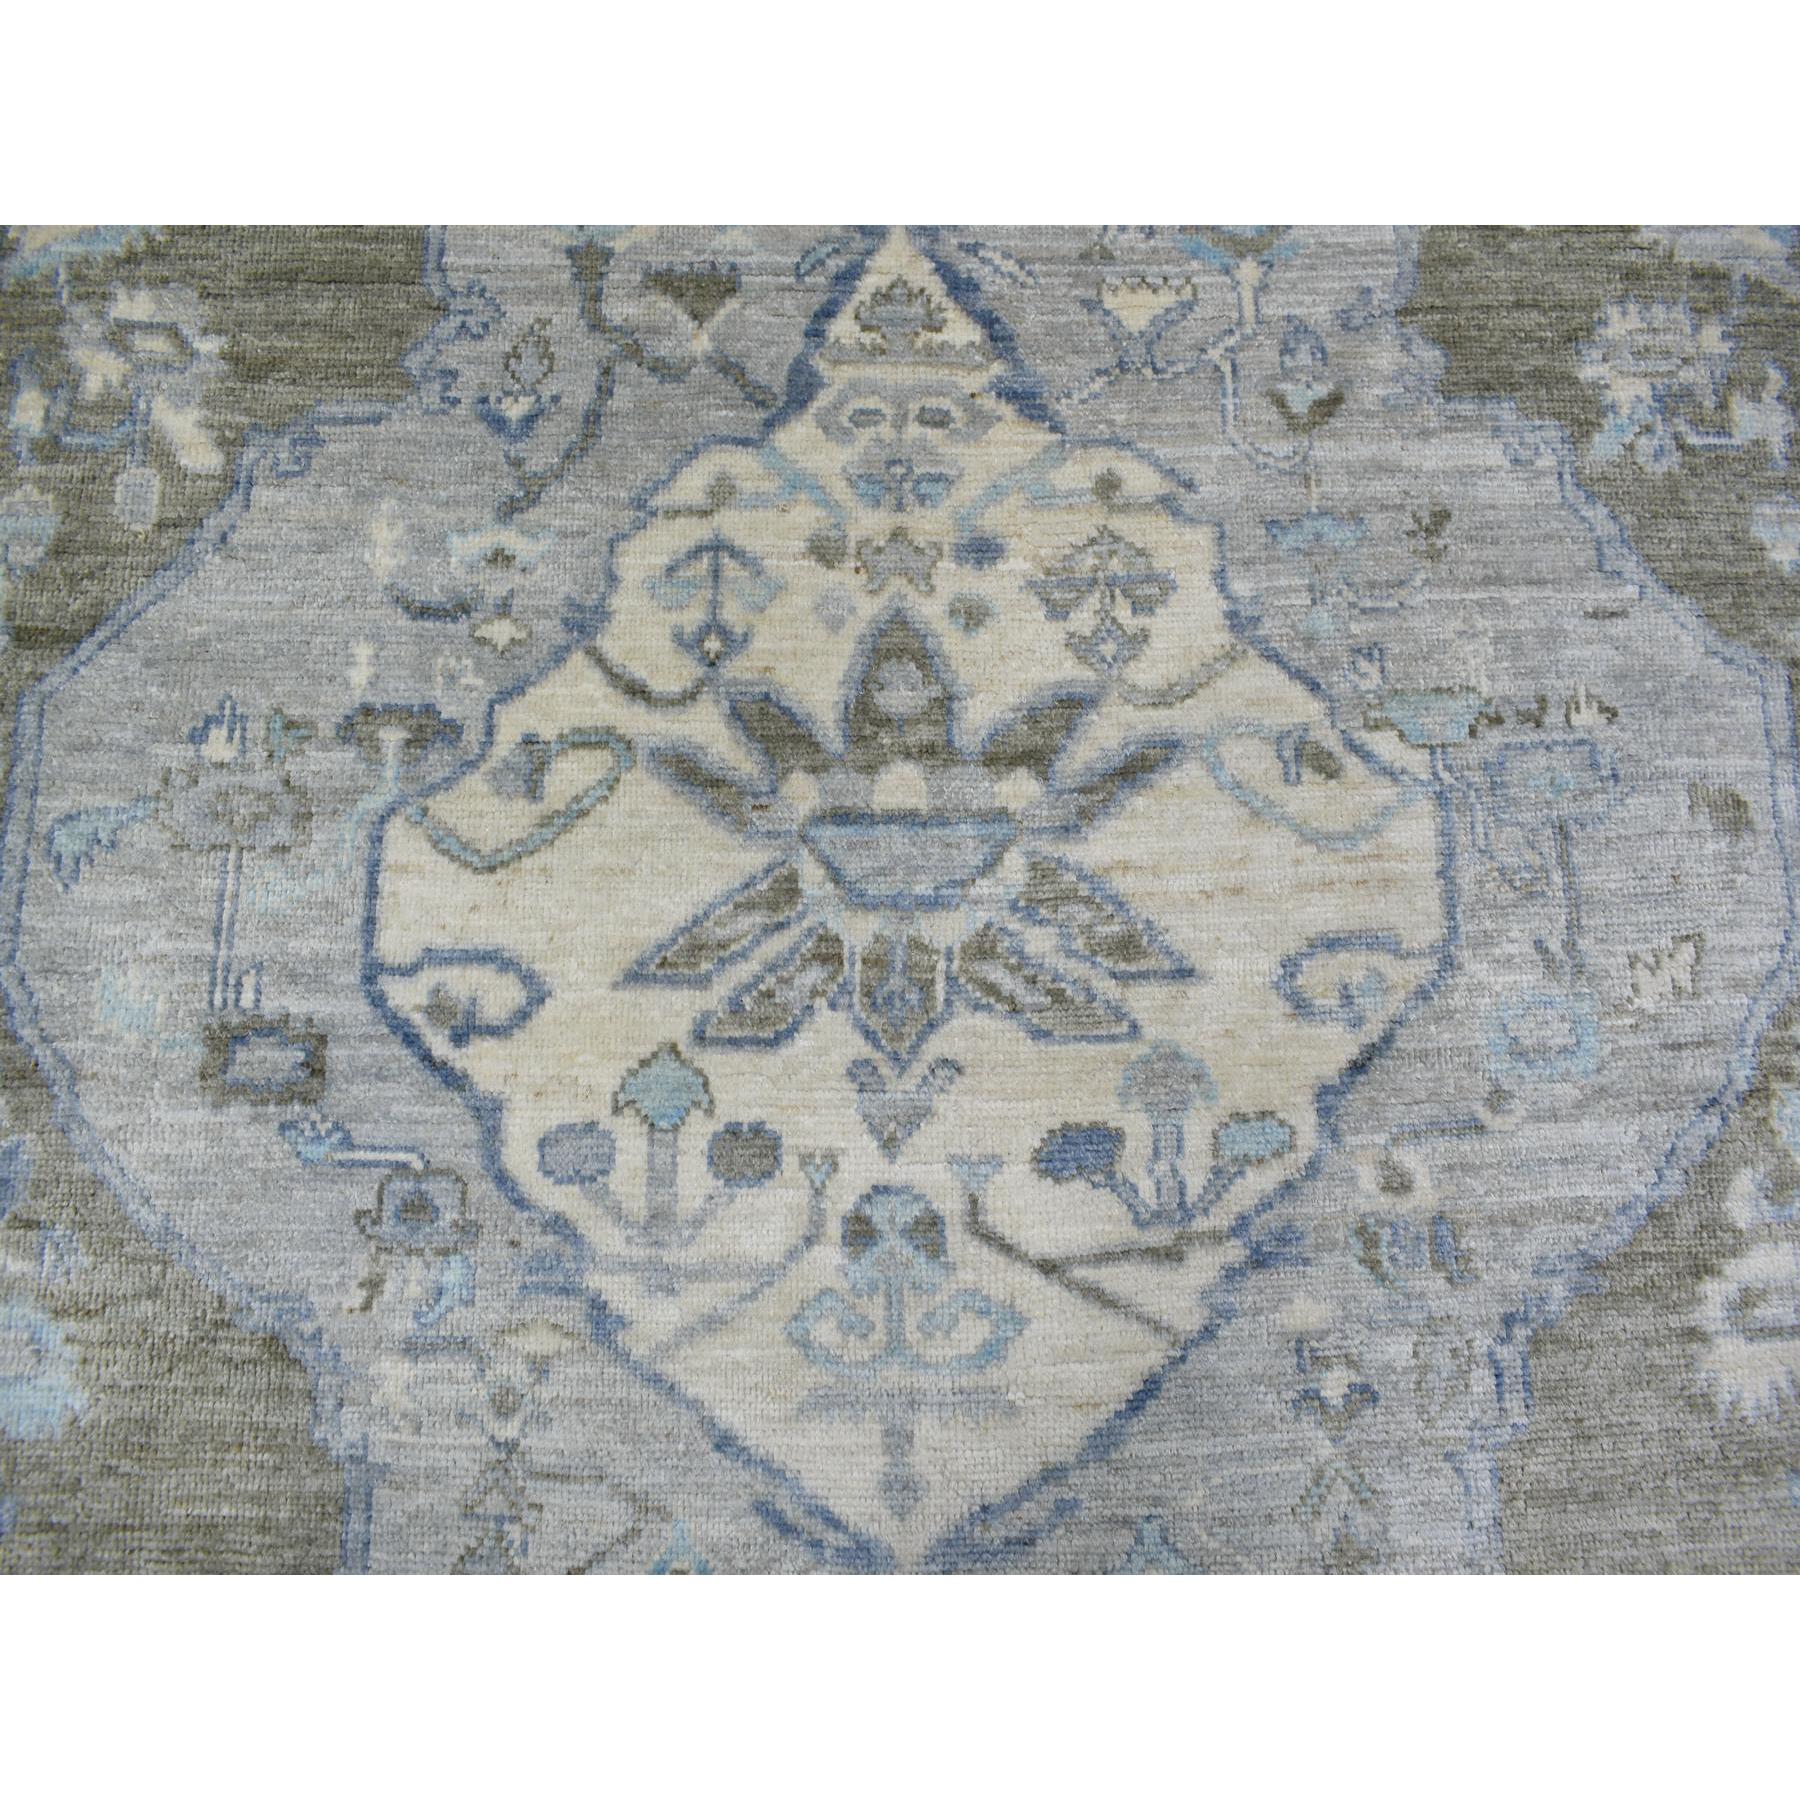 8'x9'9" Faded Taupe, Anatolian Design with Large Medallion Design Natural Dyes, Soft and Supple Wool Hand Woven, Oriental Rug 